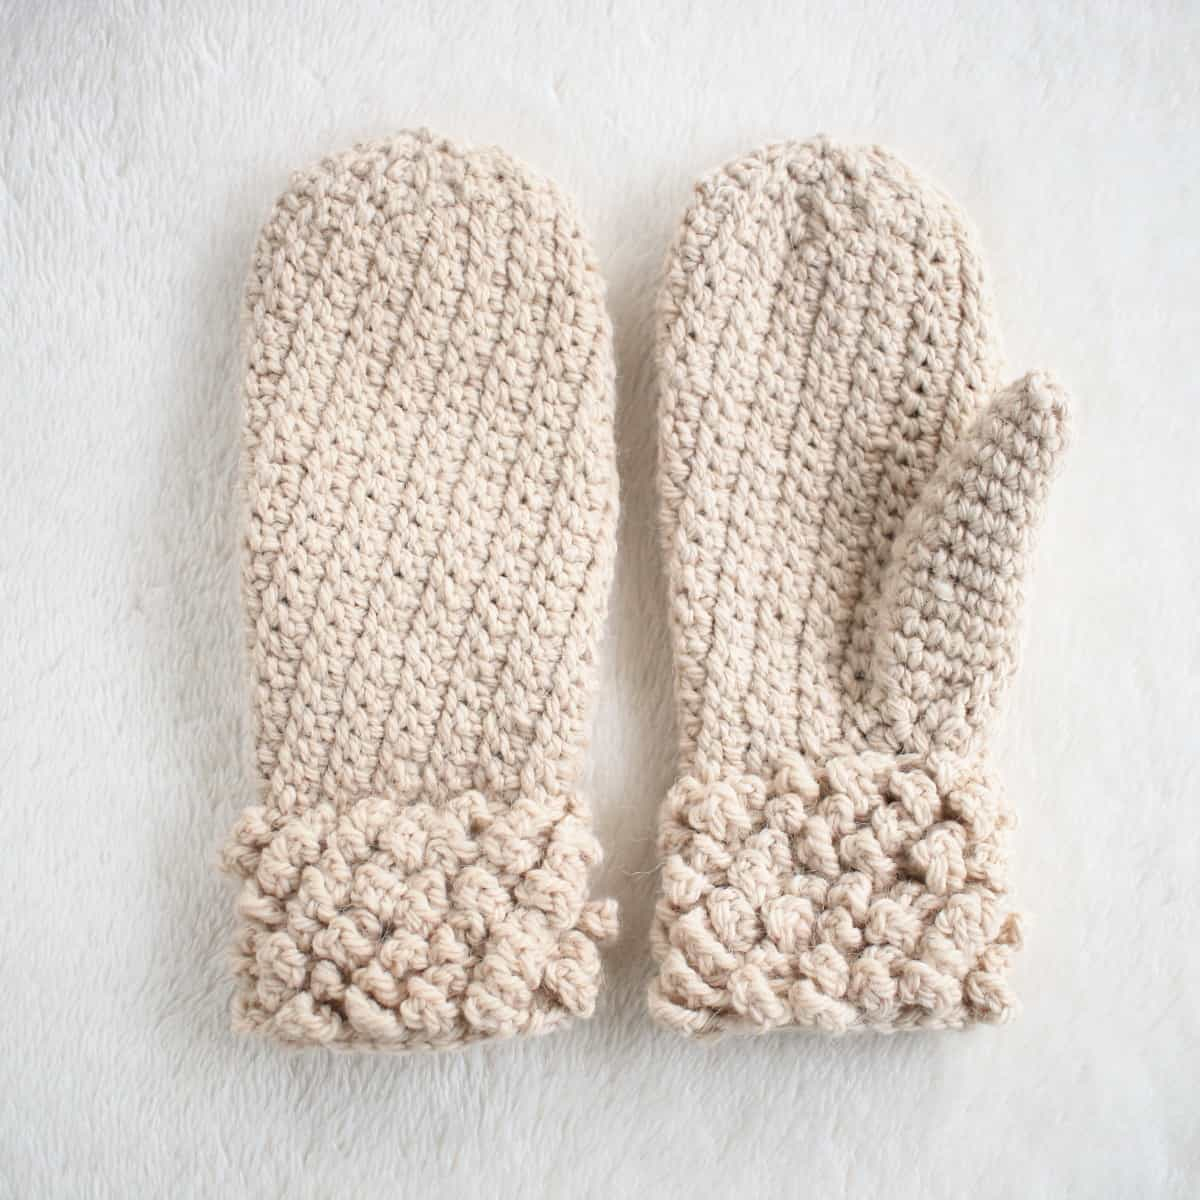 Crochet Mittens Free Pattern Simple And Easy Crochet Mittens For Adults Or Teens Crochet Life